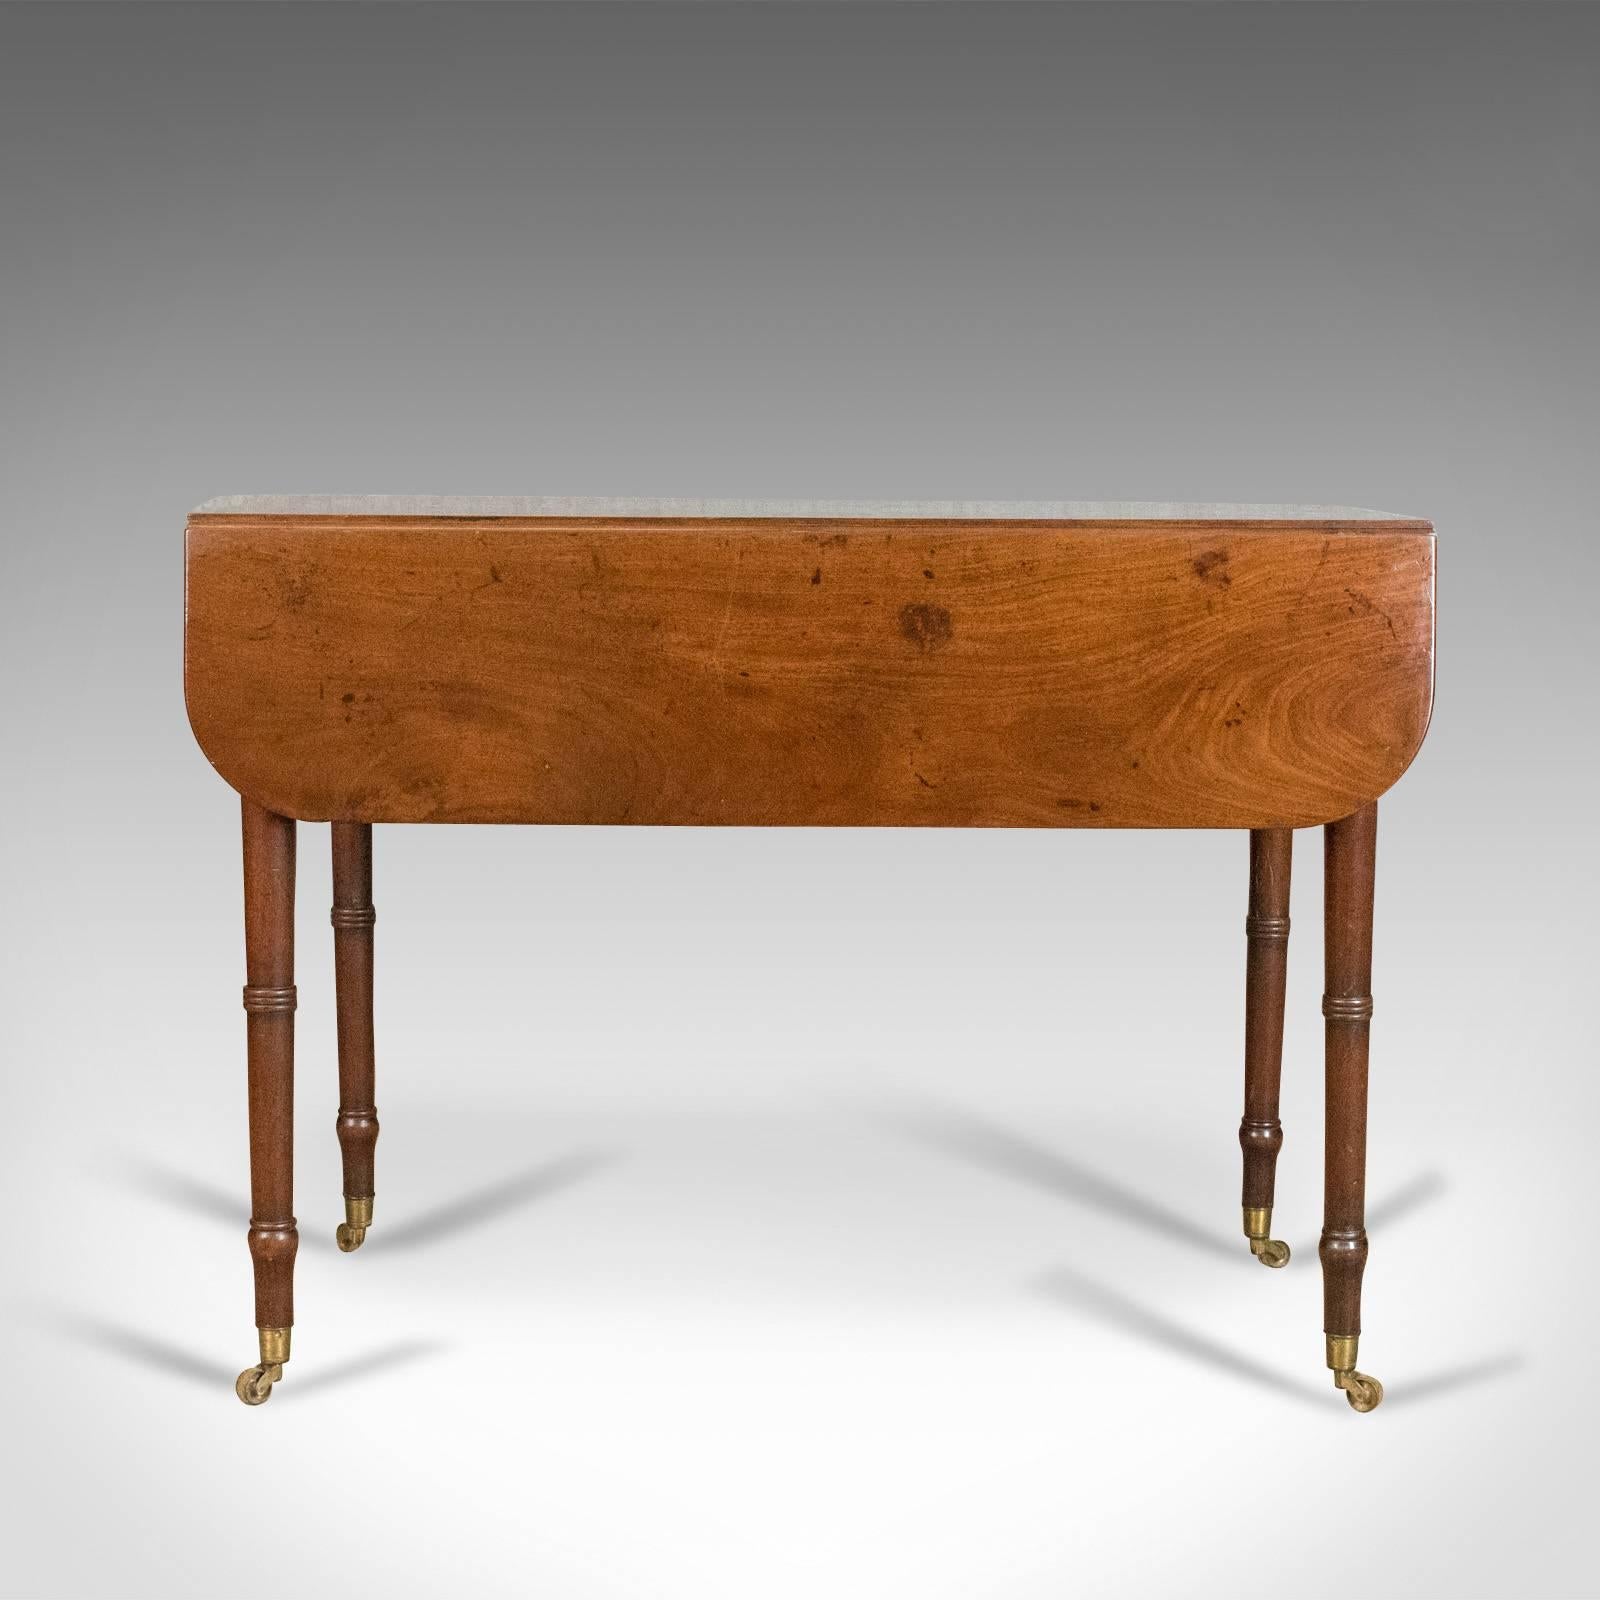 This is an antique pembroke table in mahogany. An English, Georgian drop flap dining table dating to circa 1820.

Fine example in select mahogany with attractive mid-tone pallet
Grain interest with desirable aged patina
Elegant